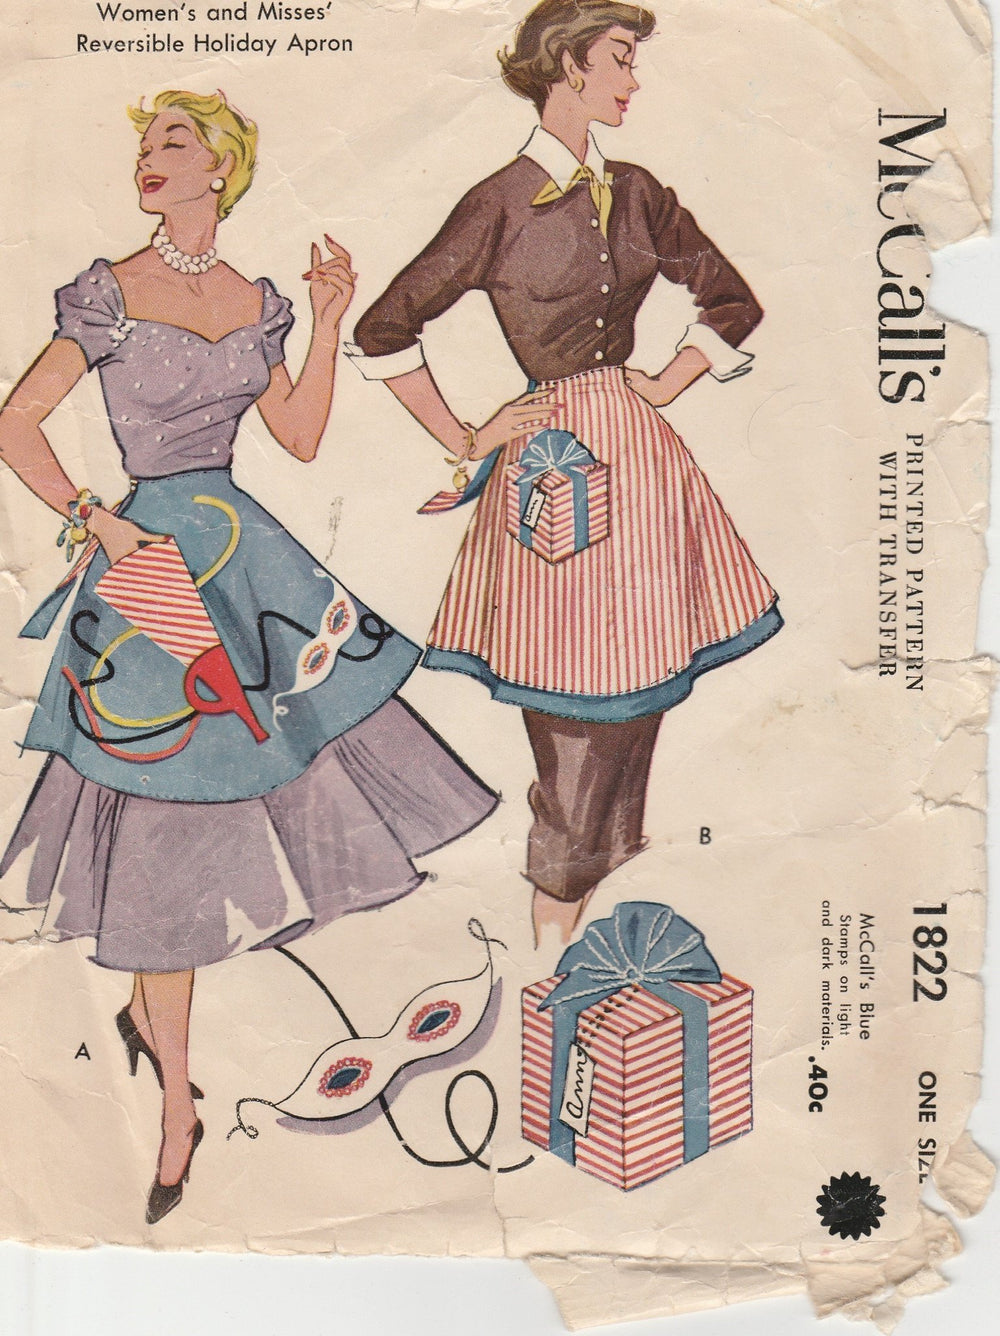 McCall's 1822 Holiday Apron Vintage Pattern 1950's Reversible - VintageStitching - Vintage Sewing Patterns